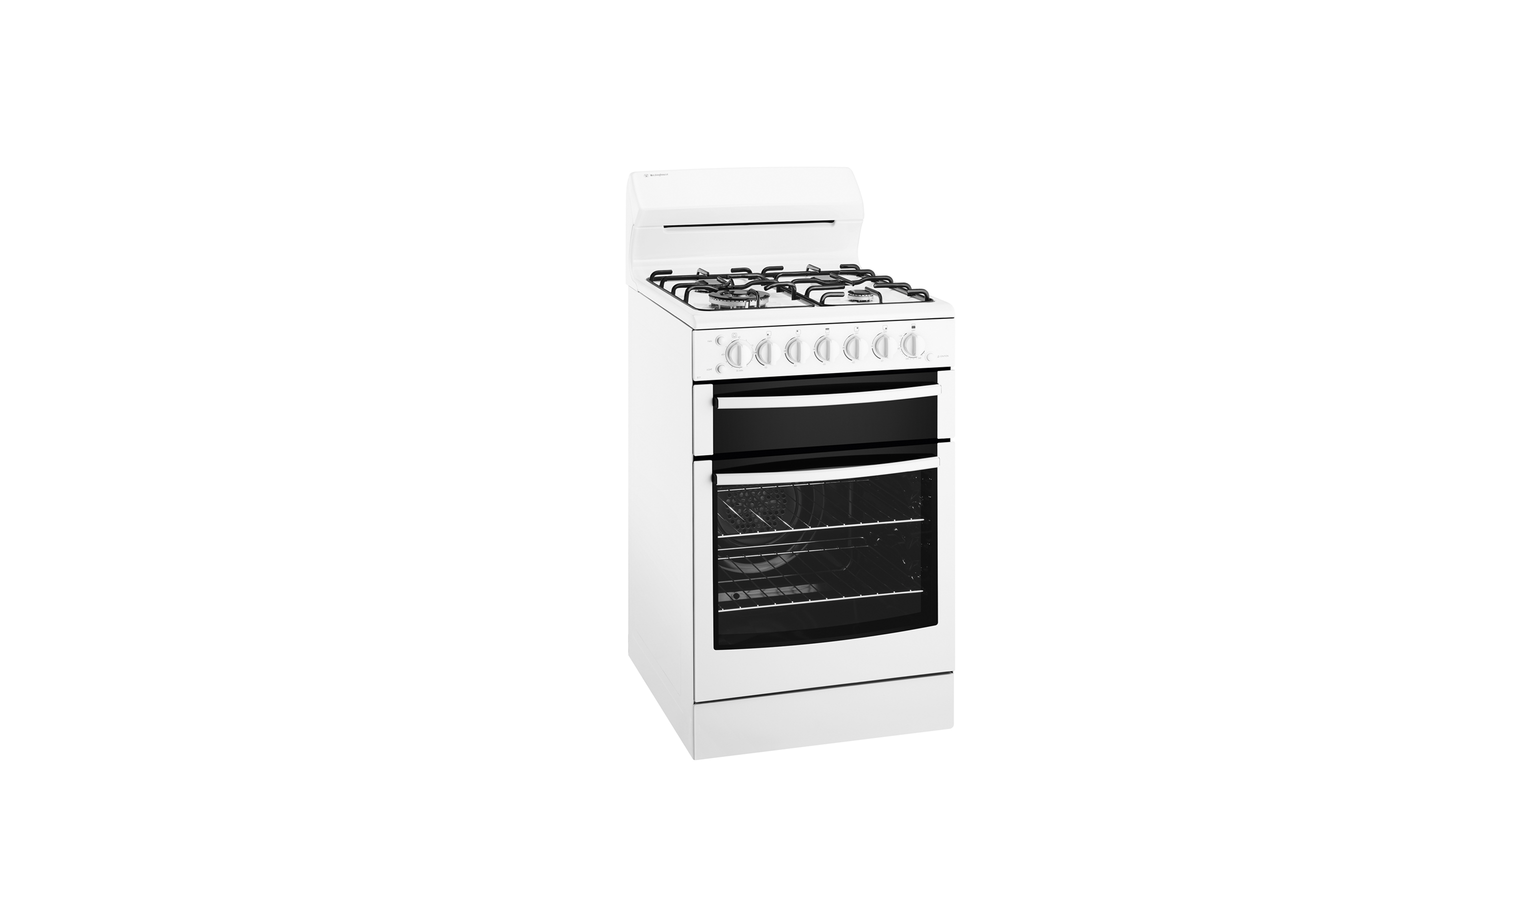 Westinghouse WLG510, WLG512 Gas Freestanding Cooker User Guide